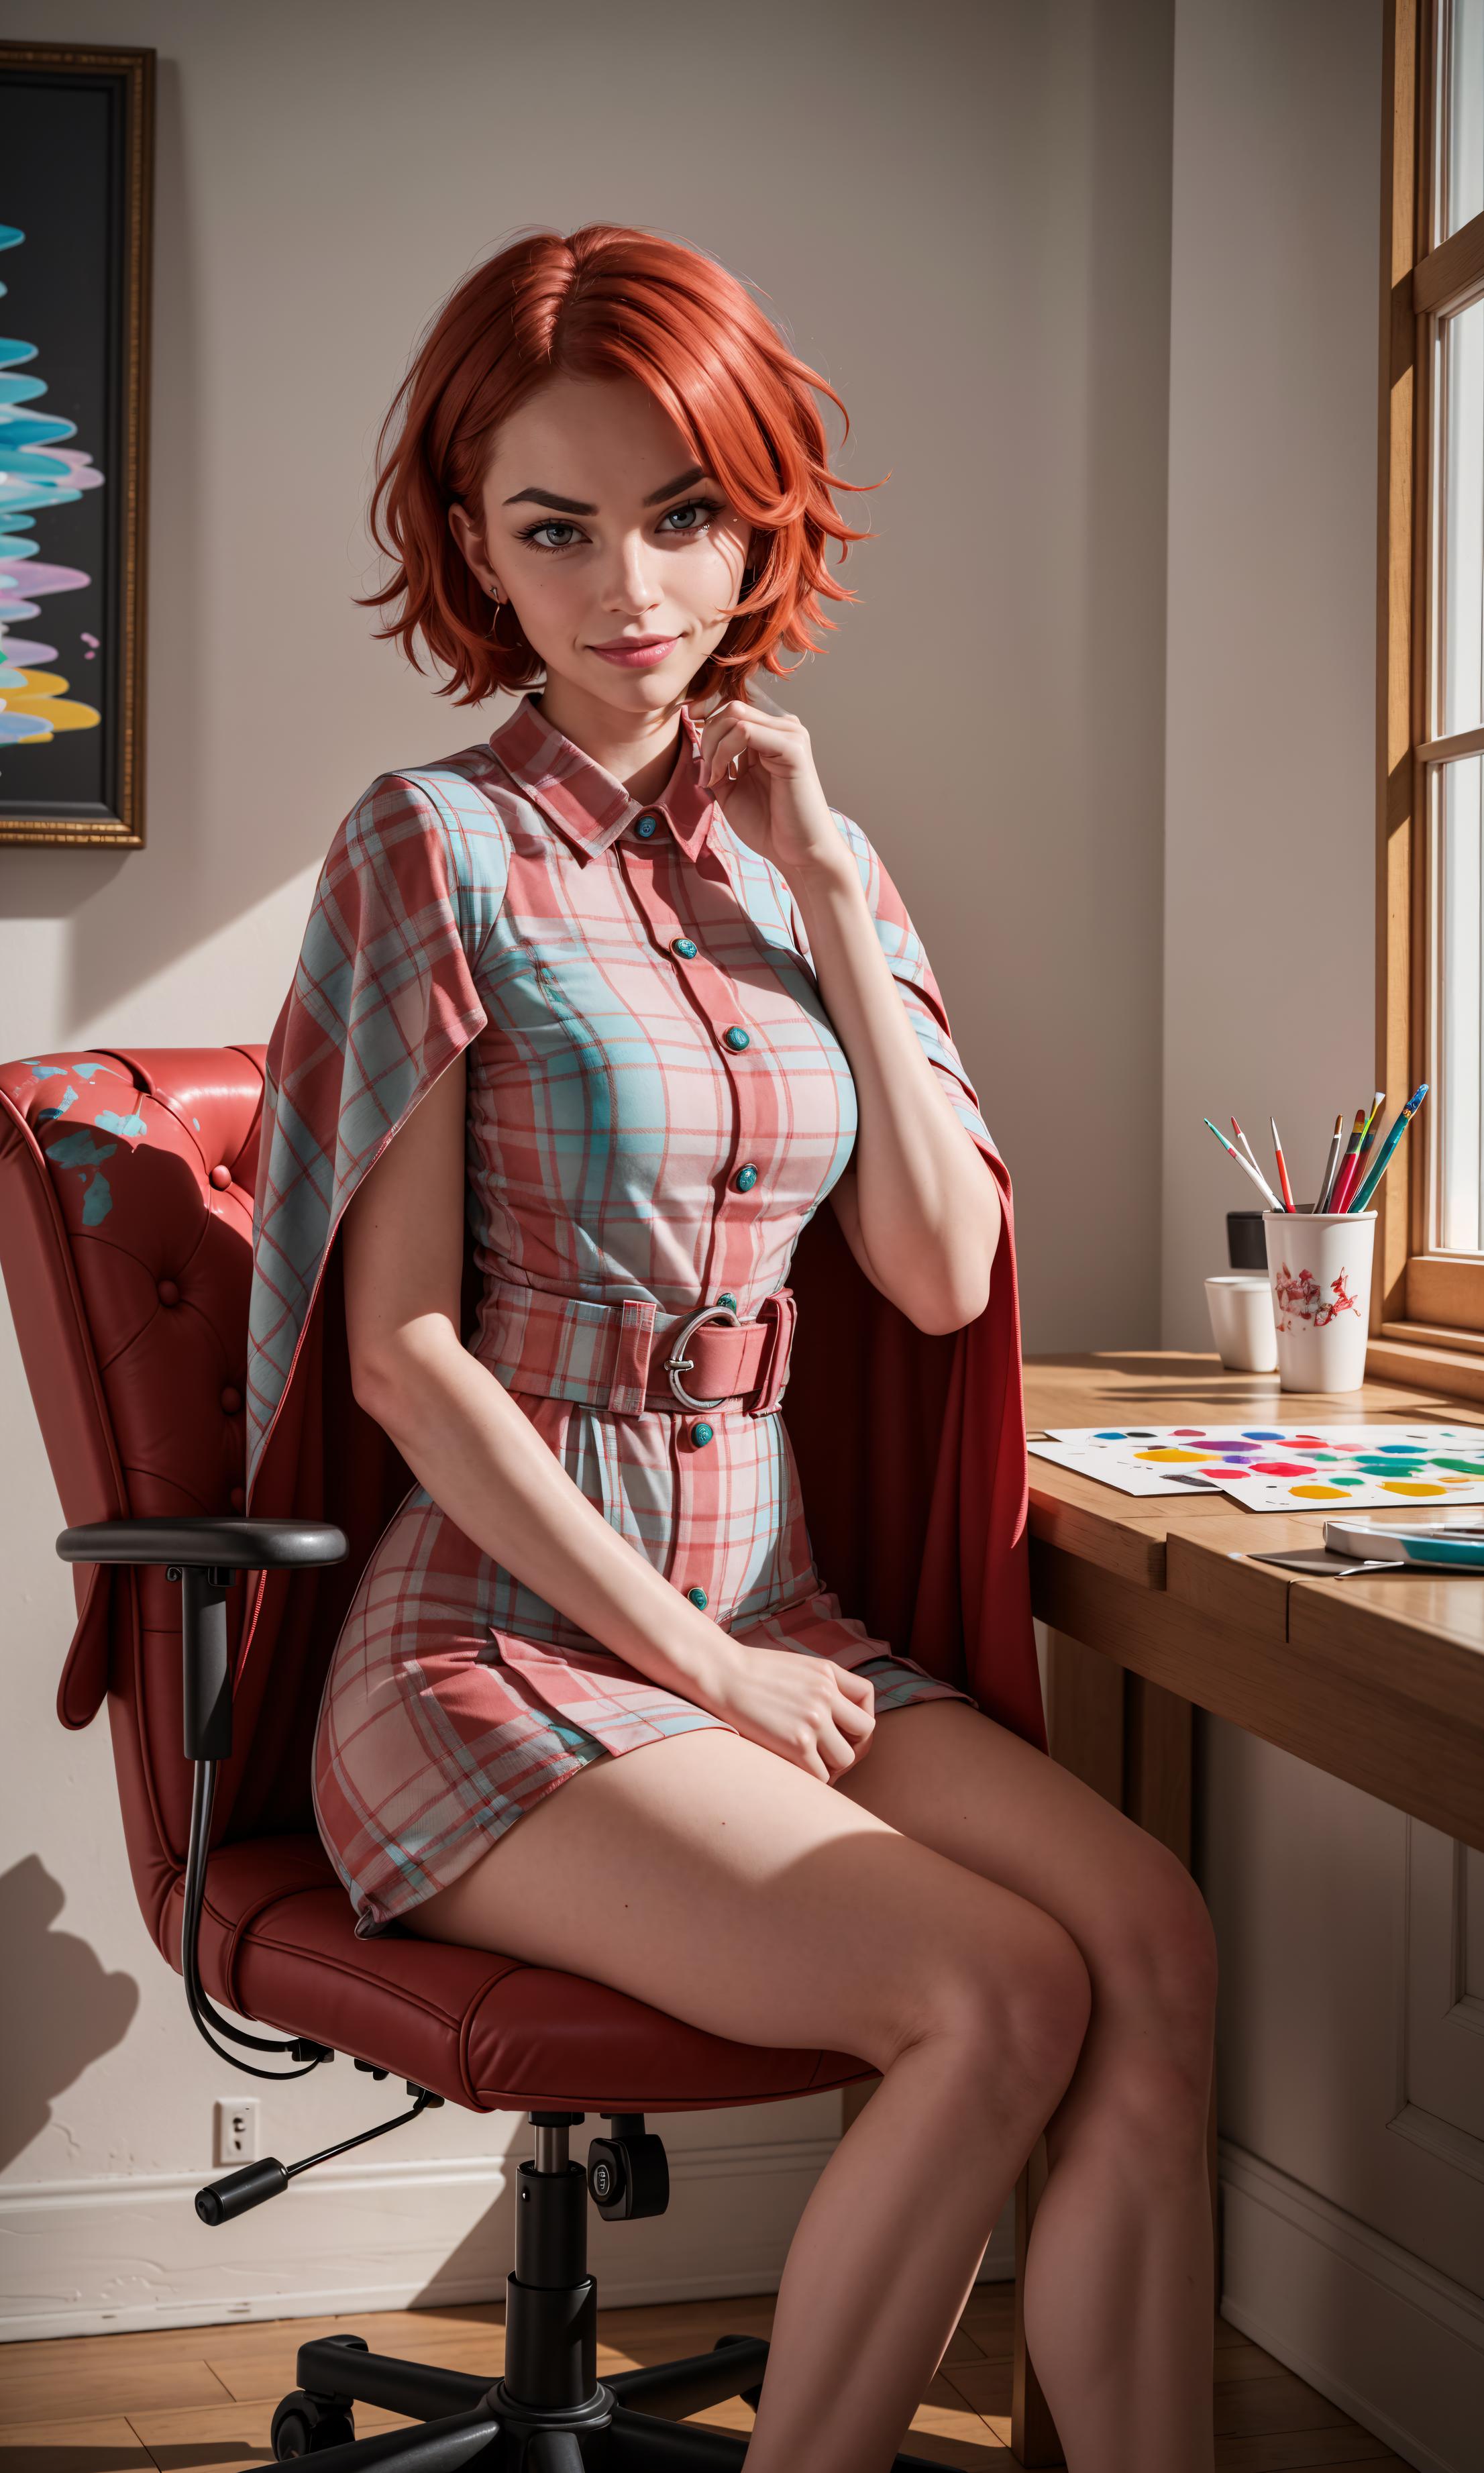 Plaid Dress with attached Cape image by jembers1337464